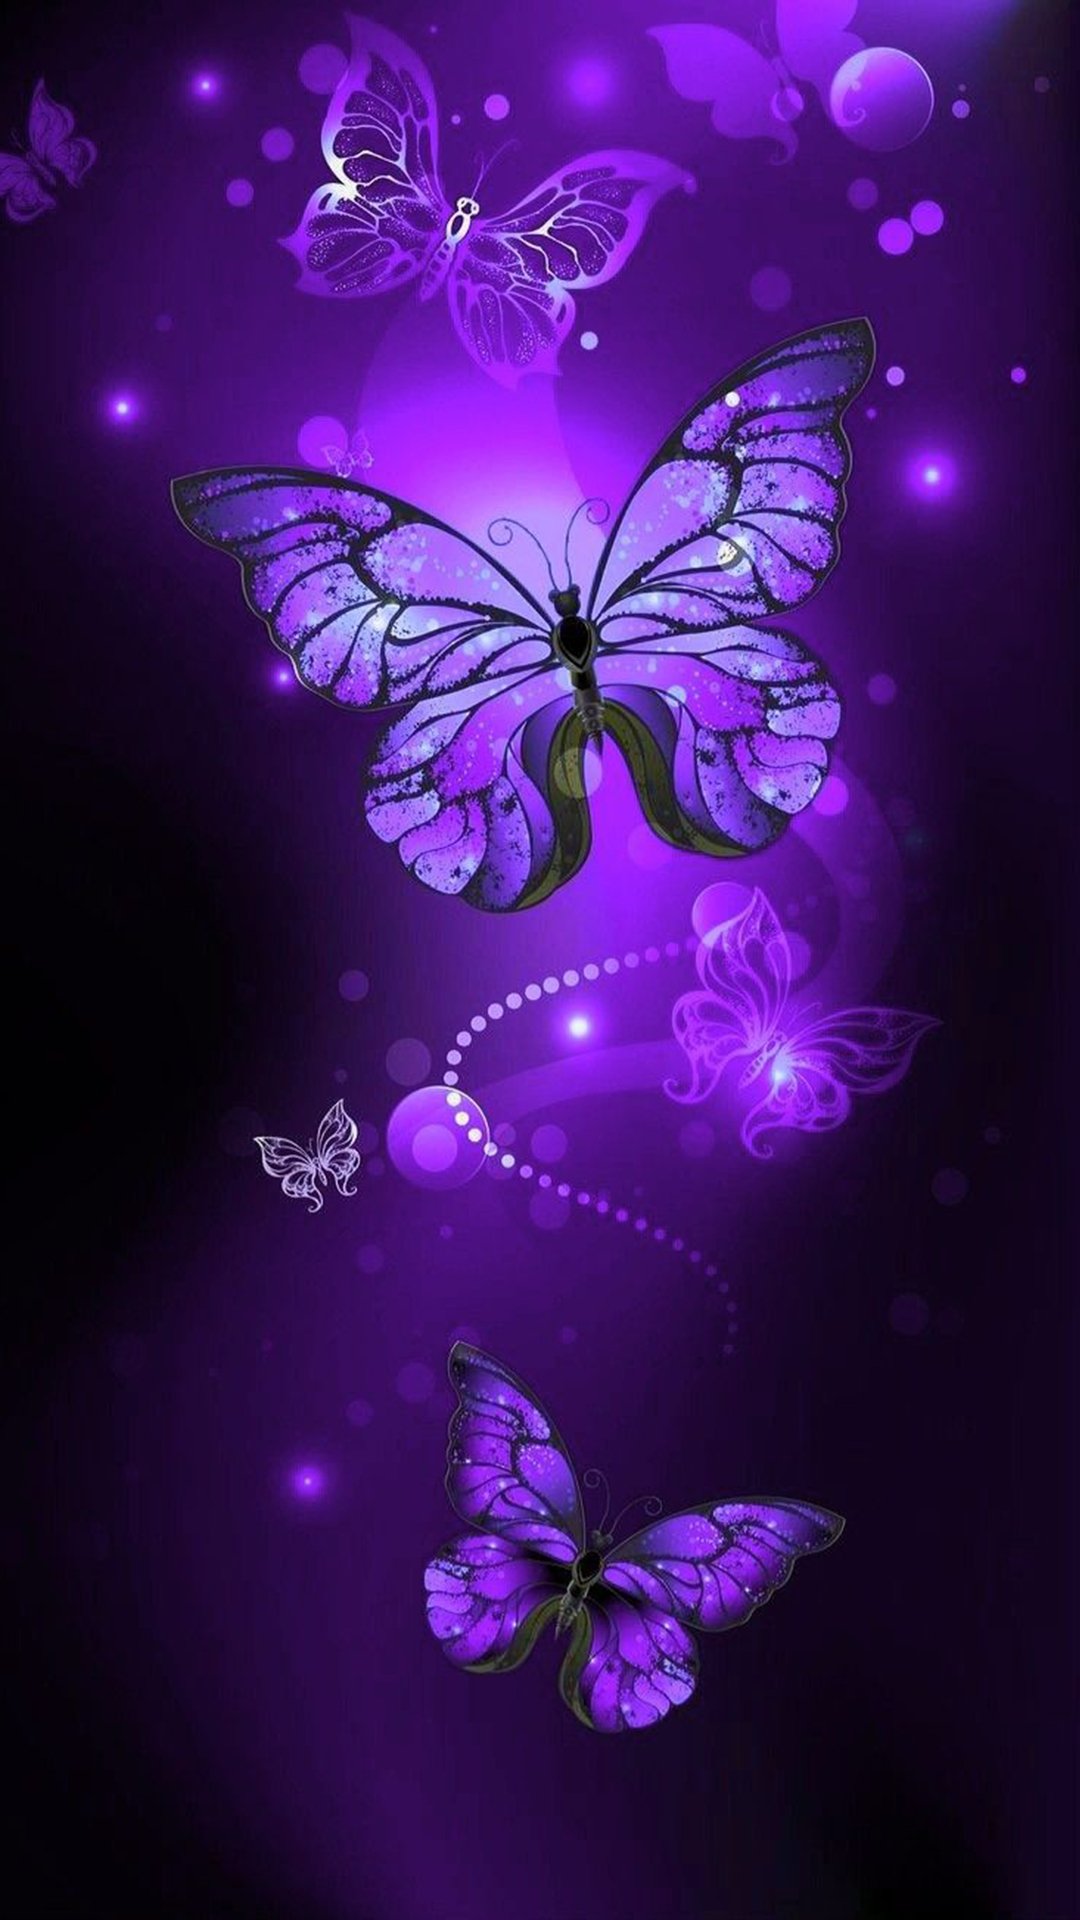 Aesthetic Butterfly Wallpaper Free Download